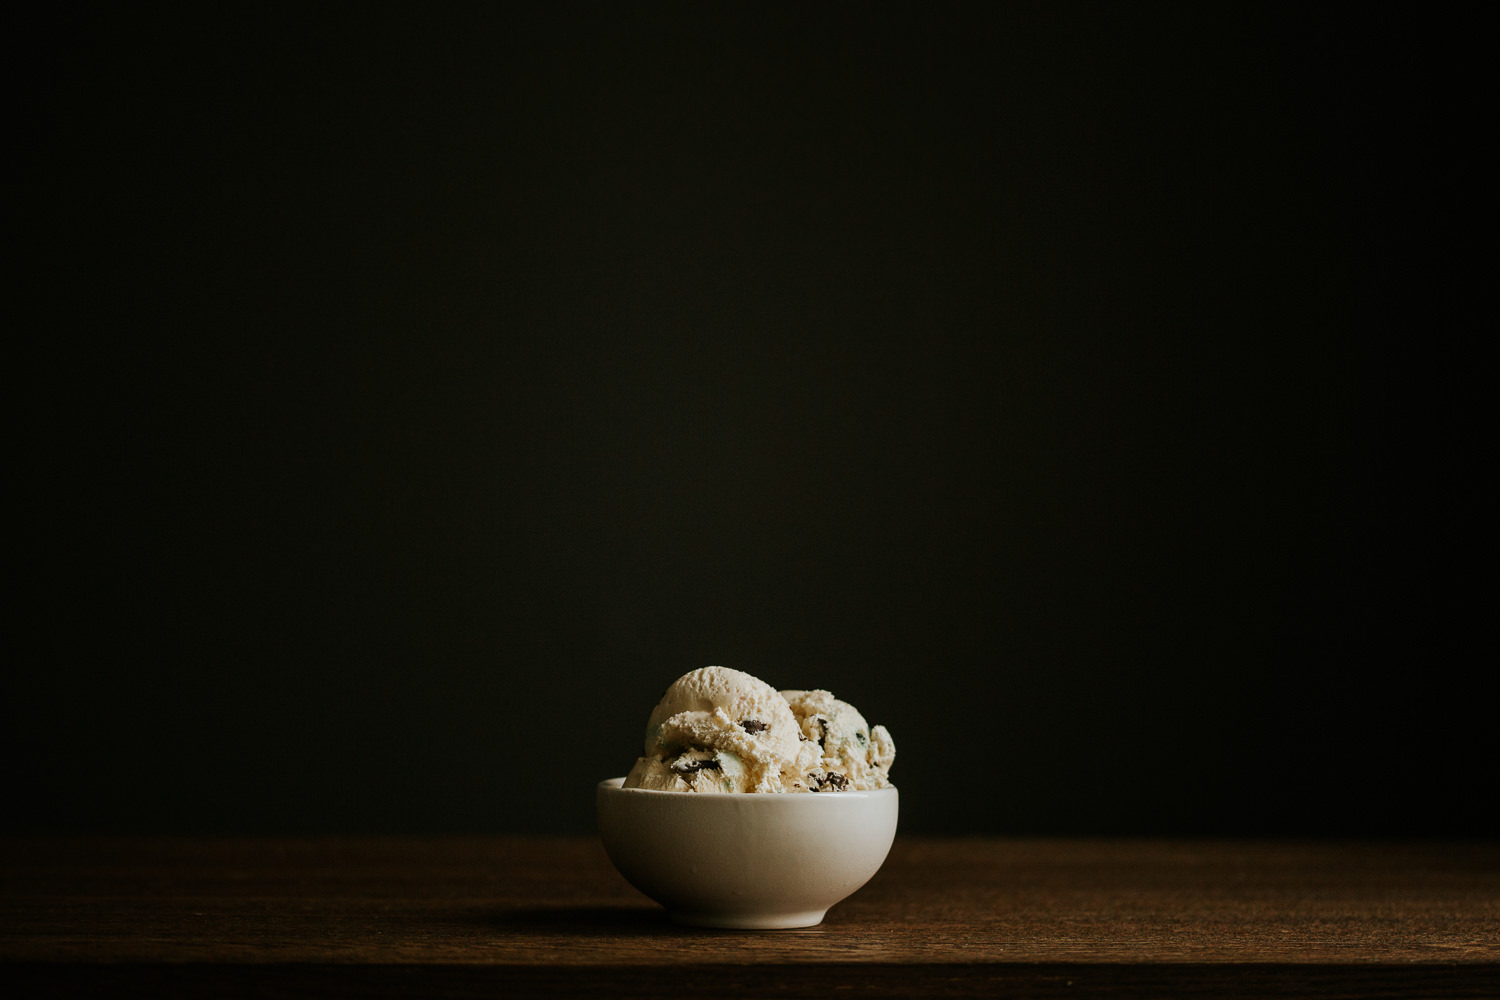 candy cane ice cream in white bowl on wood table - Toronto food photography